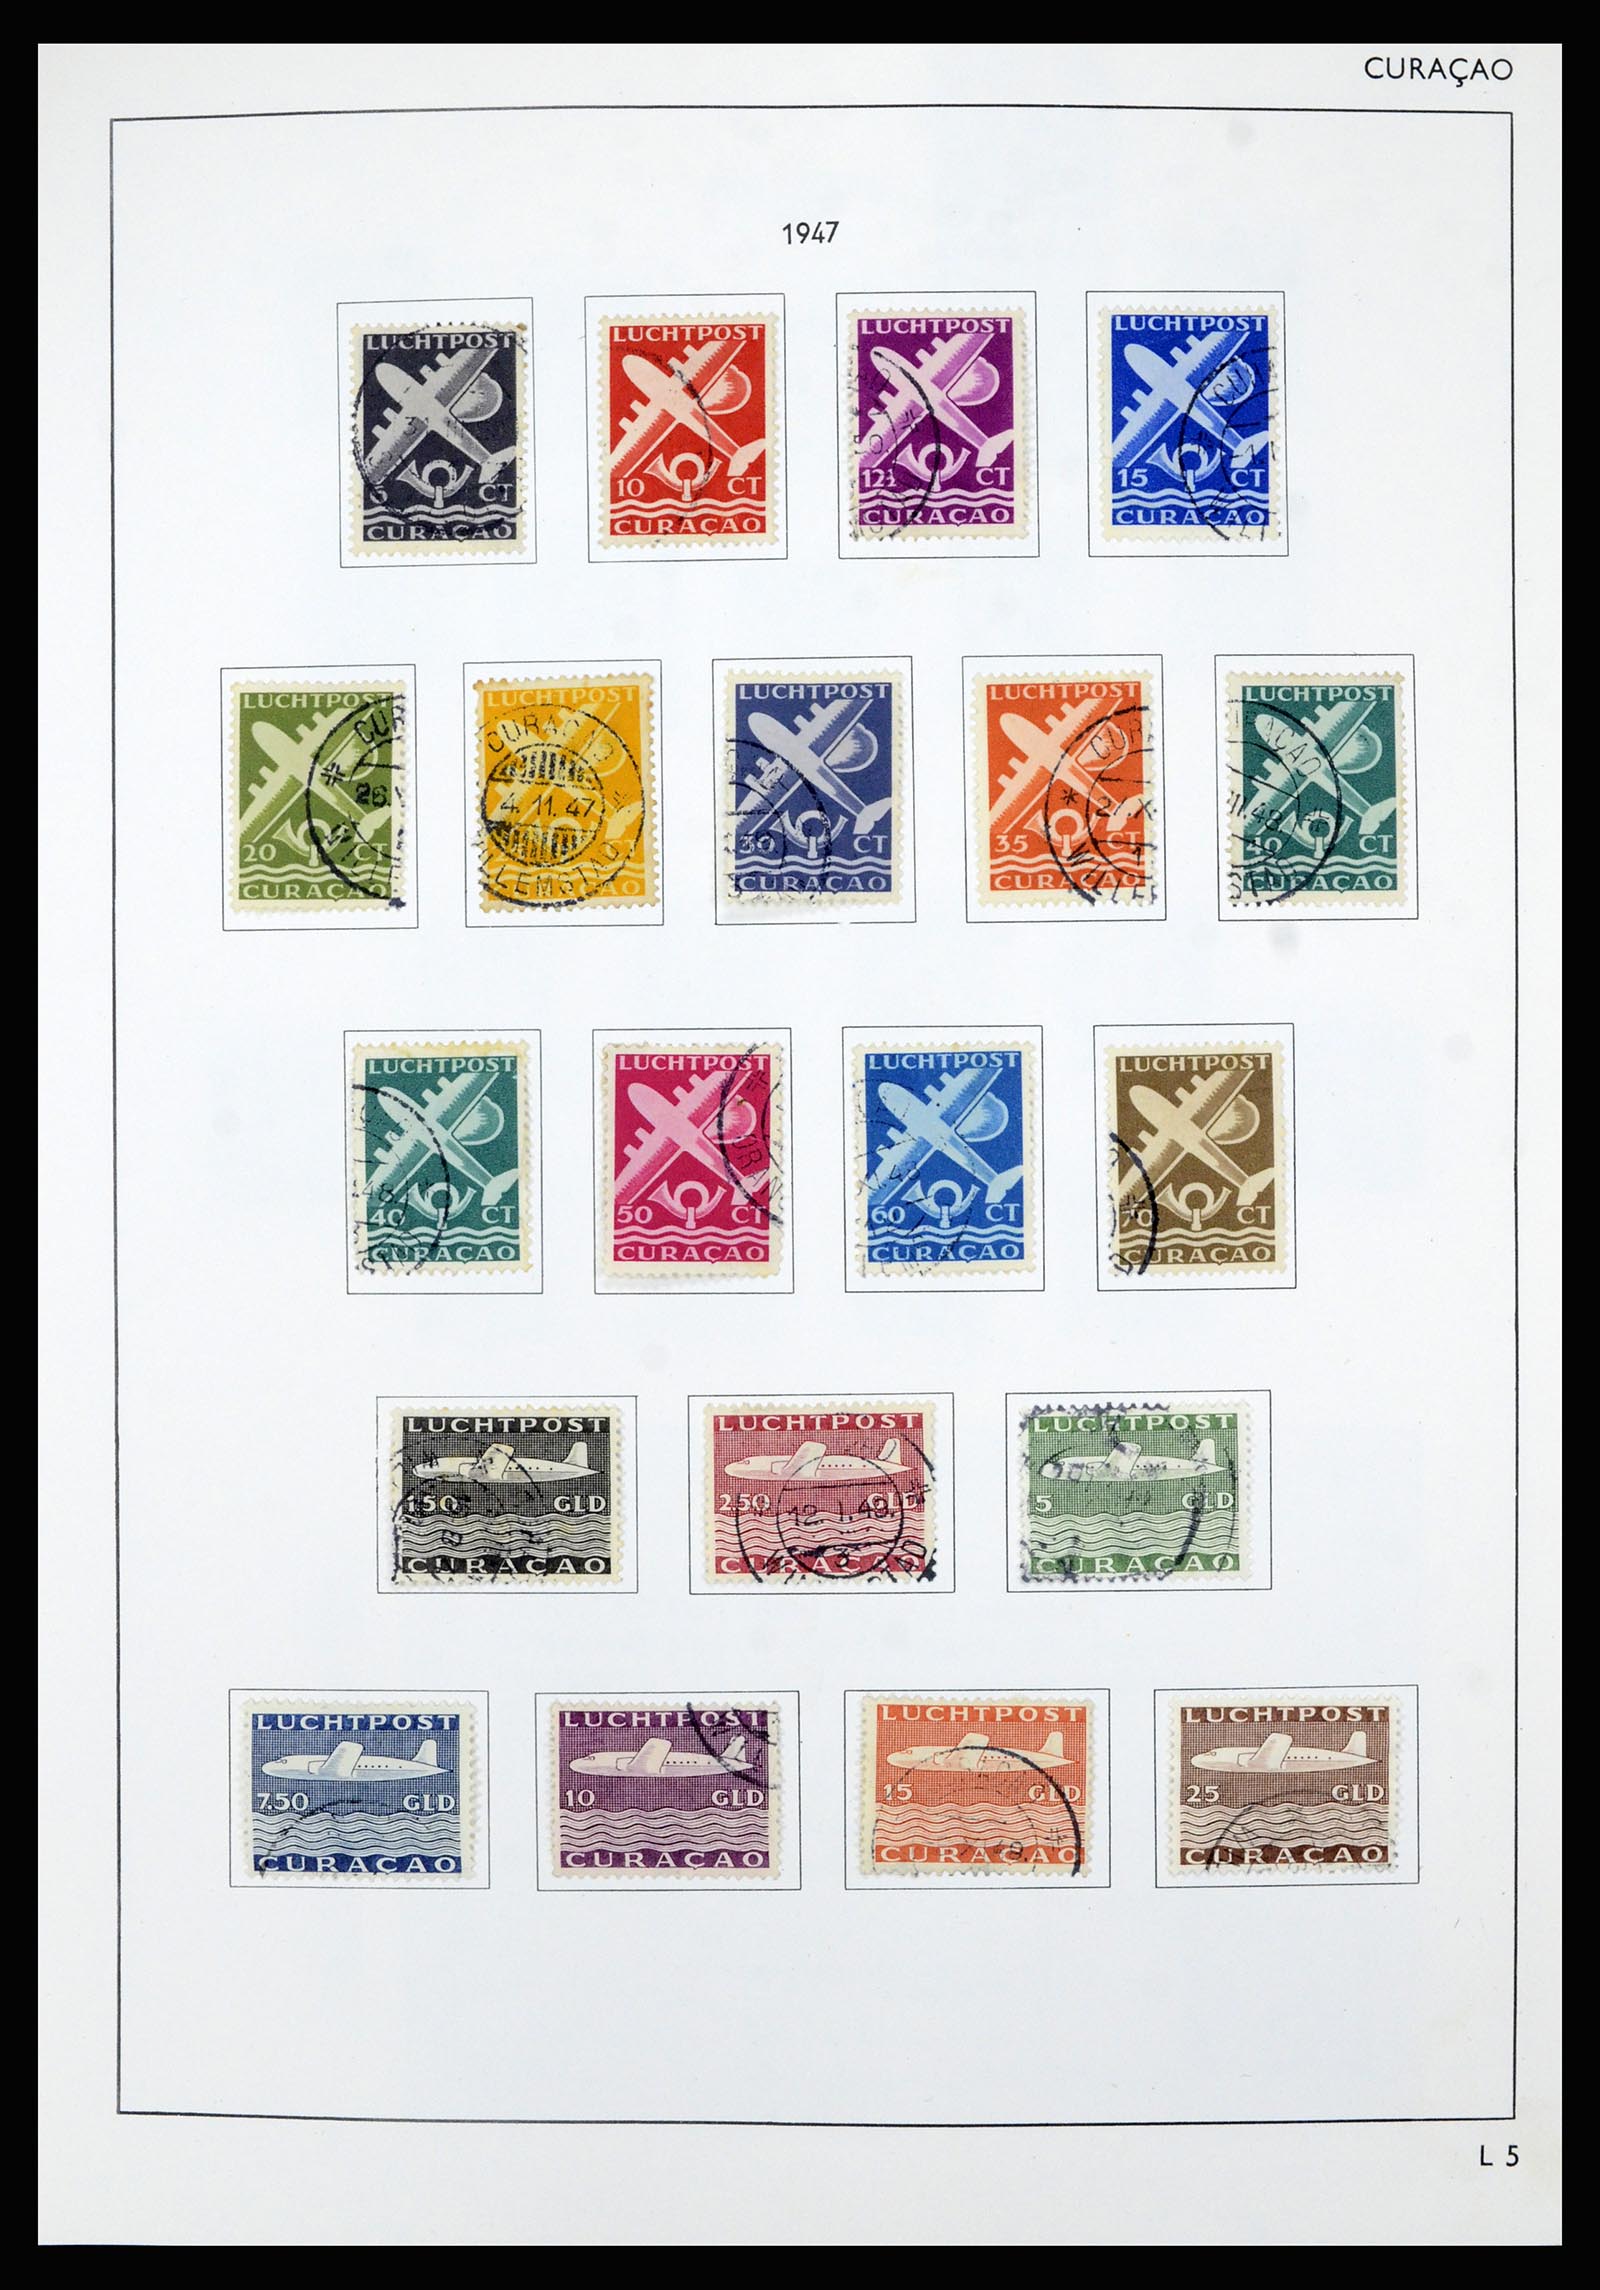 36835 017 - Stamp collection 36835 Curaçao and Dutch Antilles 1873-1990.